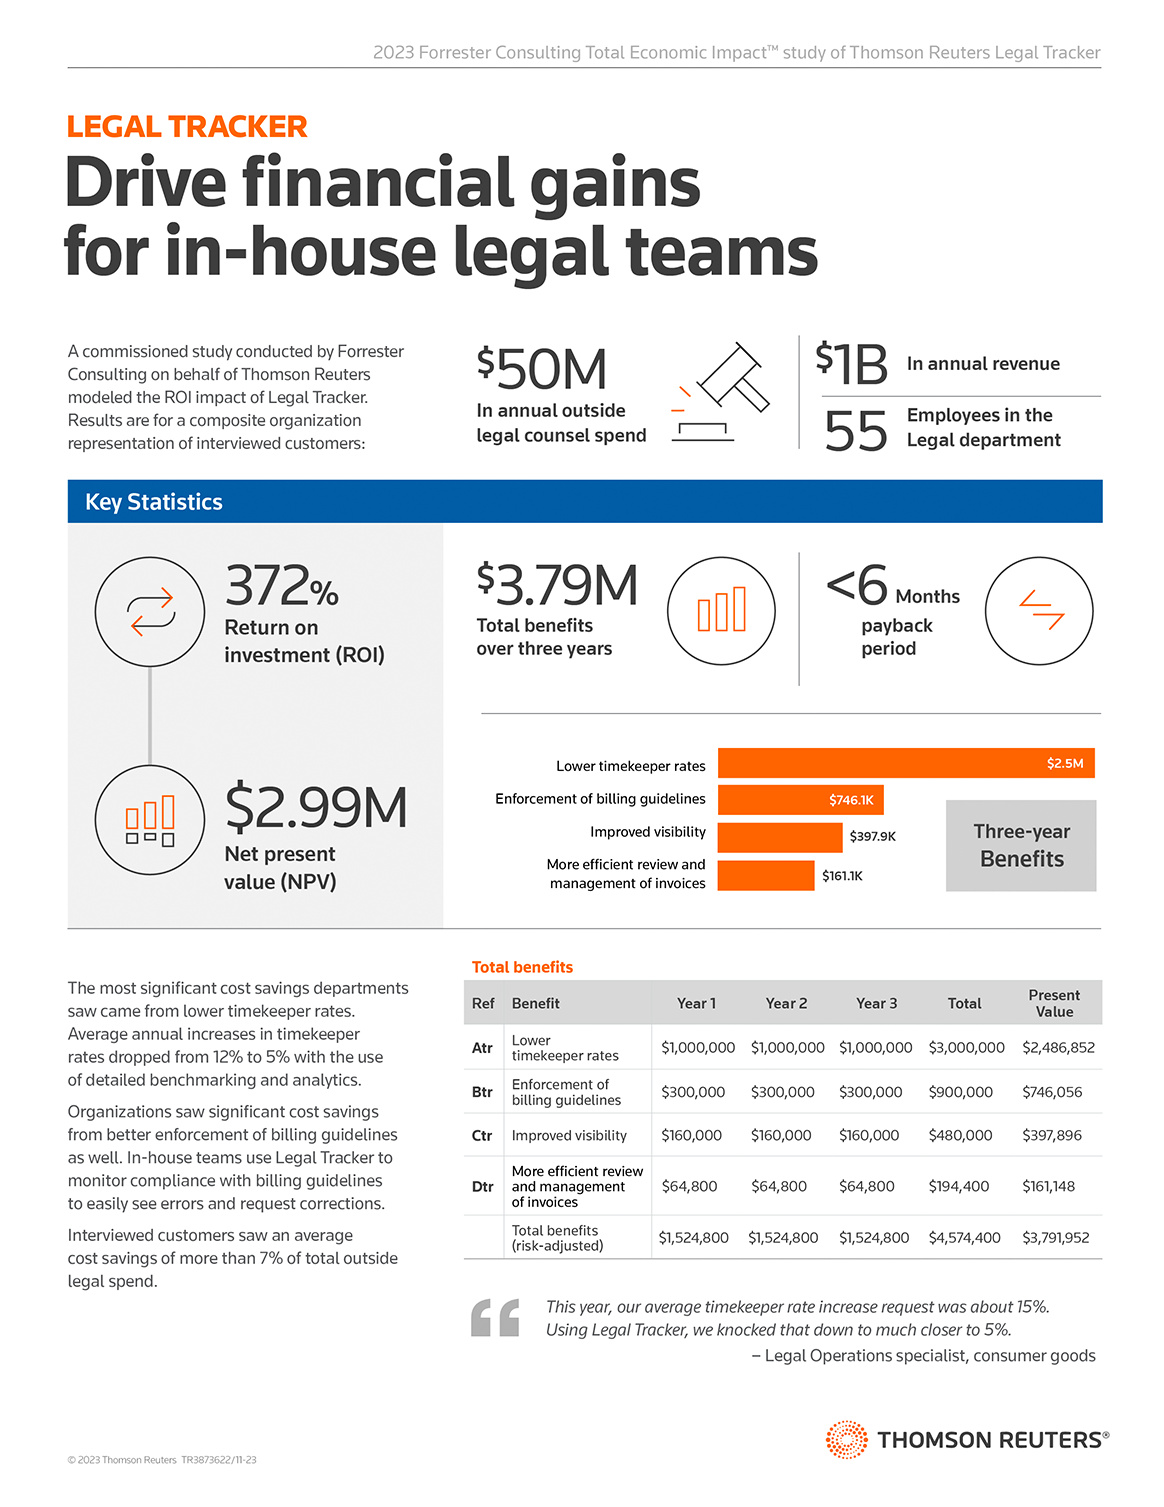 A commissioned study conducted by Forrester Consulting on behalf of Thomson Reuters models the ROI impact of Legal Tracker — results are for a composite organization representation of interviewed customers